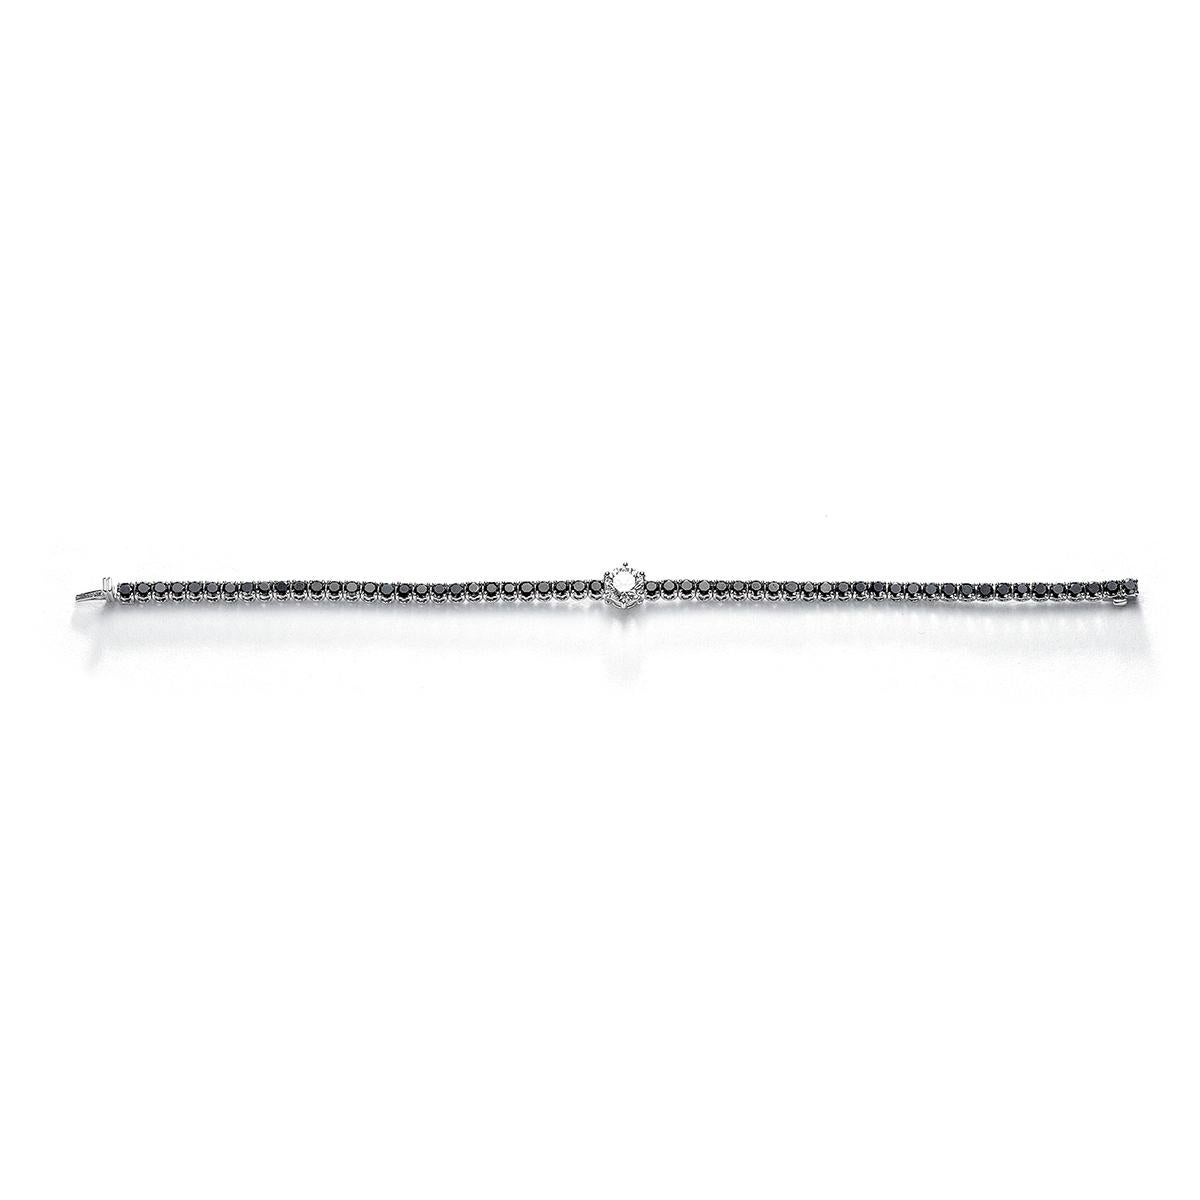 Bracelet in 18kt white gold set with one diamonds 1.14 cts M VS1 and 56 black diamonds 6.19 cts     